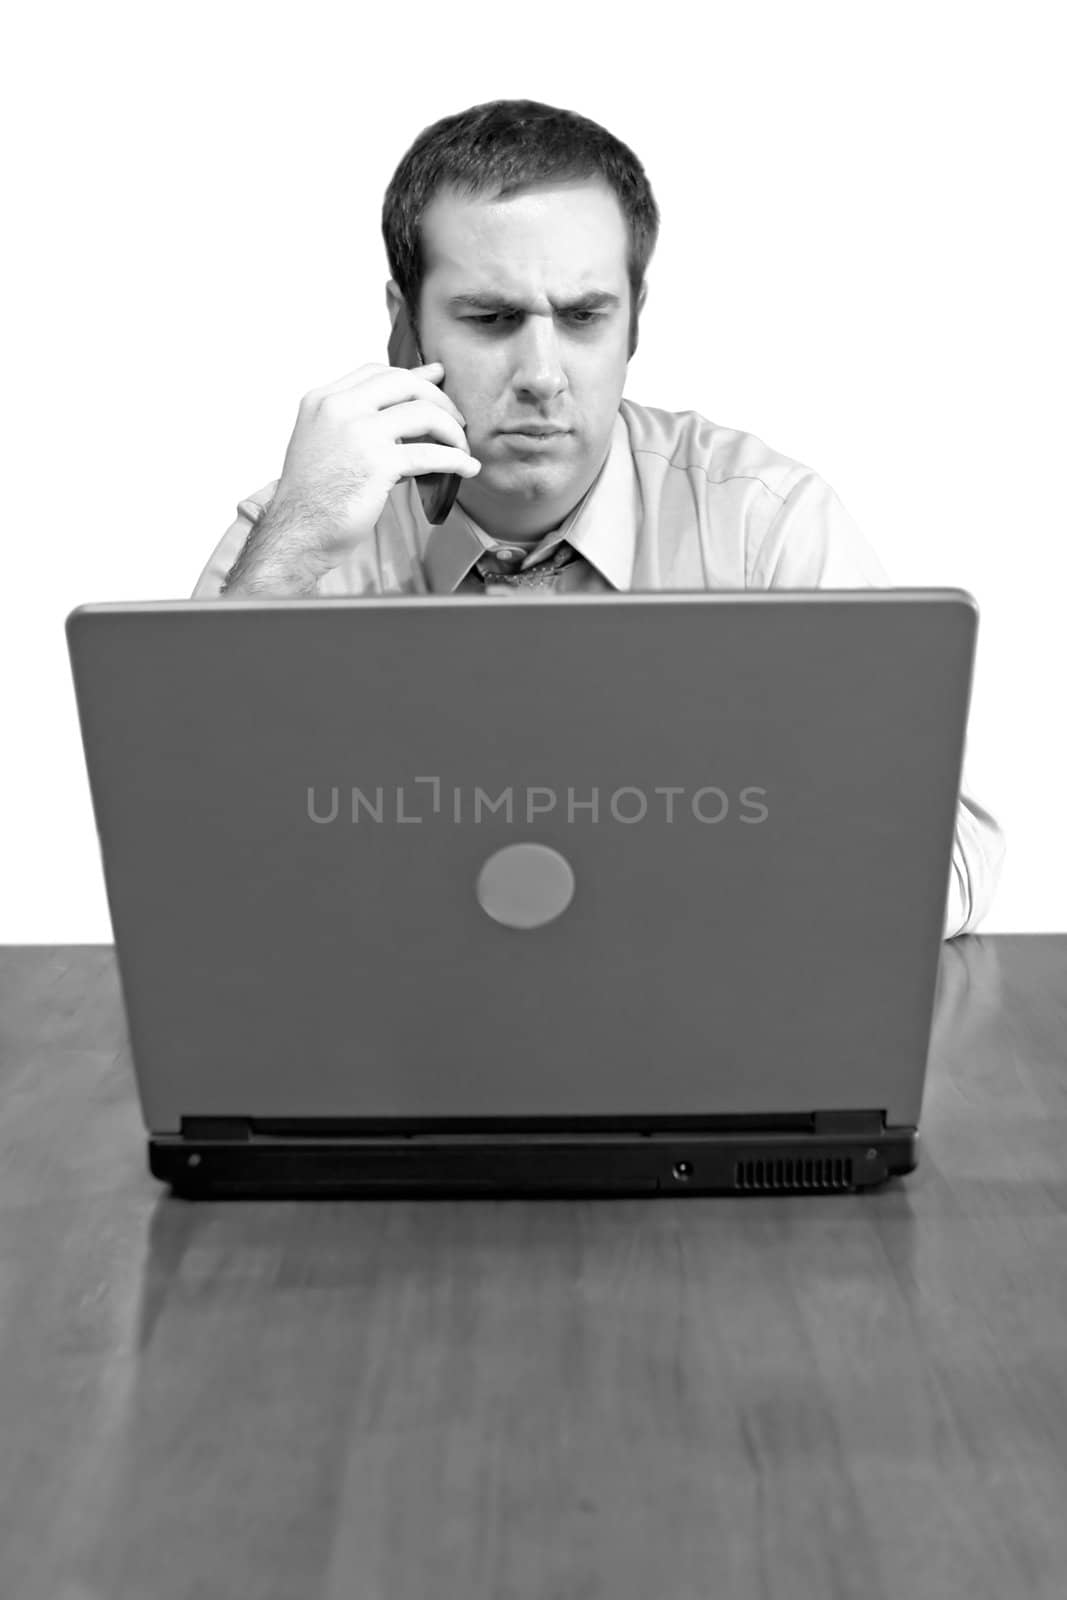 A man working from home with his cell phone and laptop in black and white. He has an upset or serious look on his face.